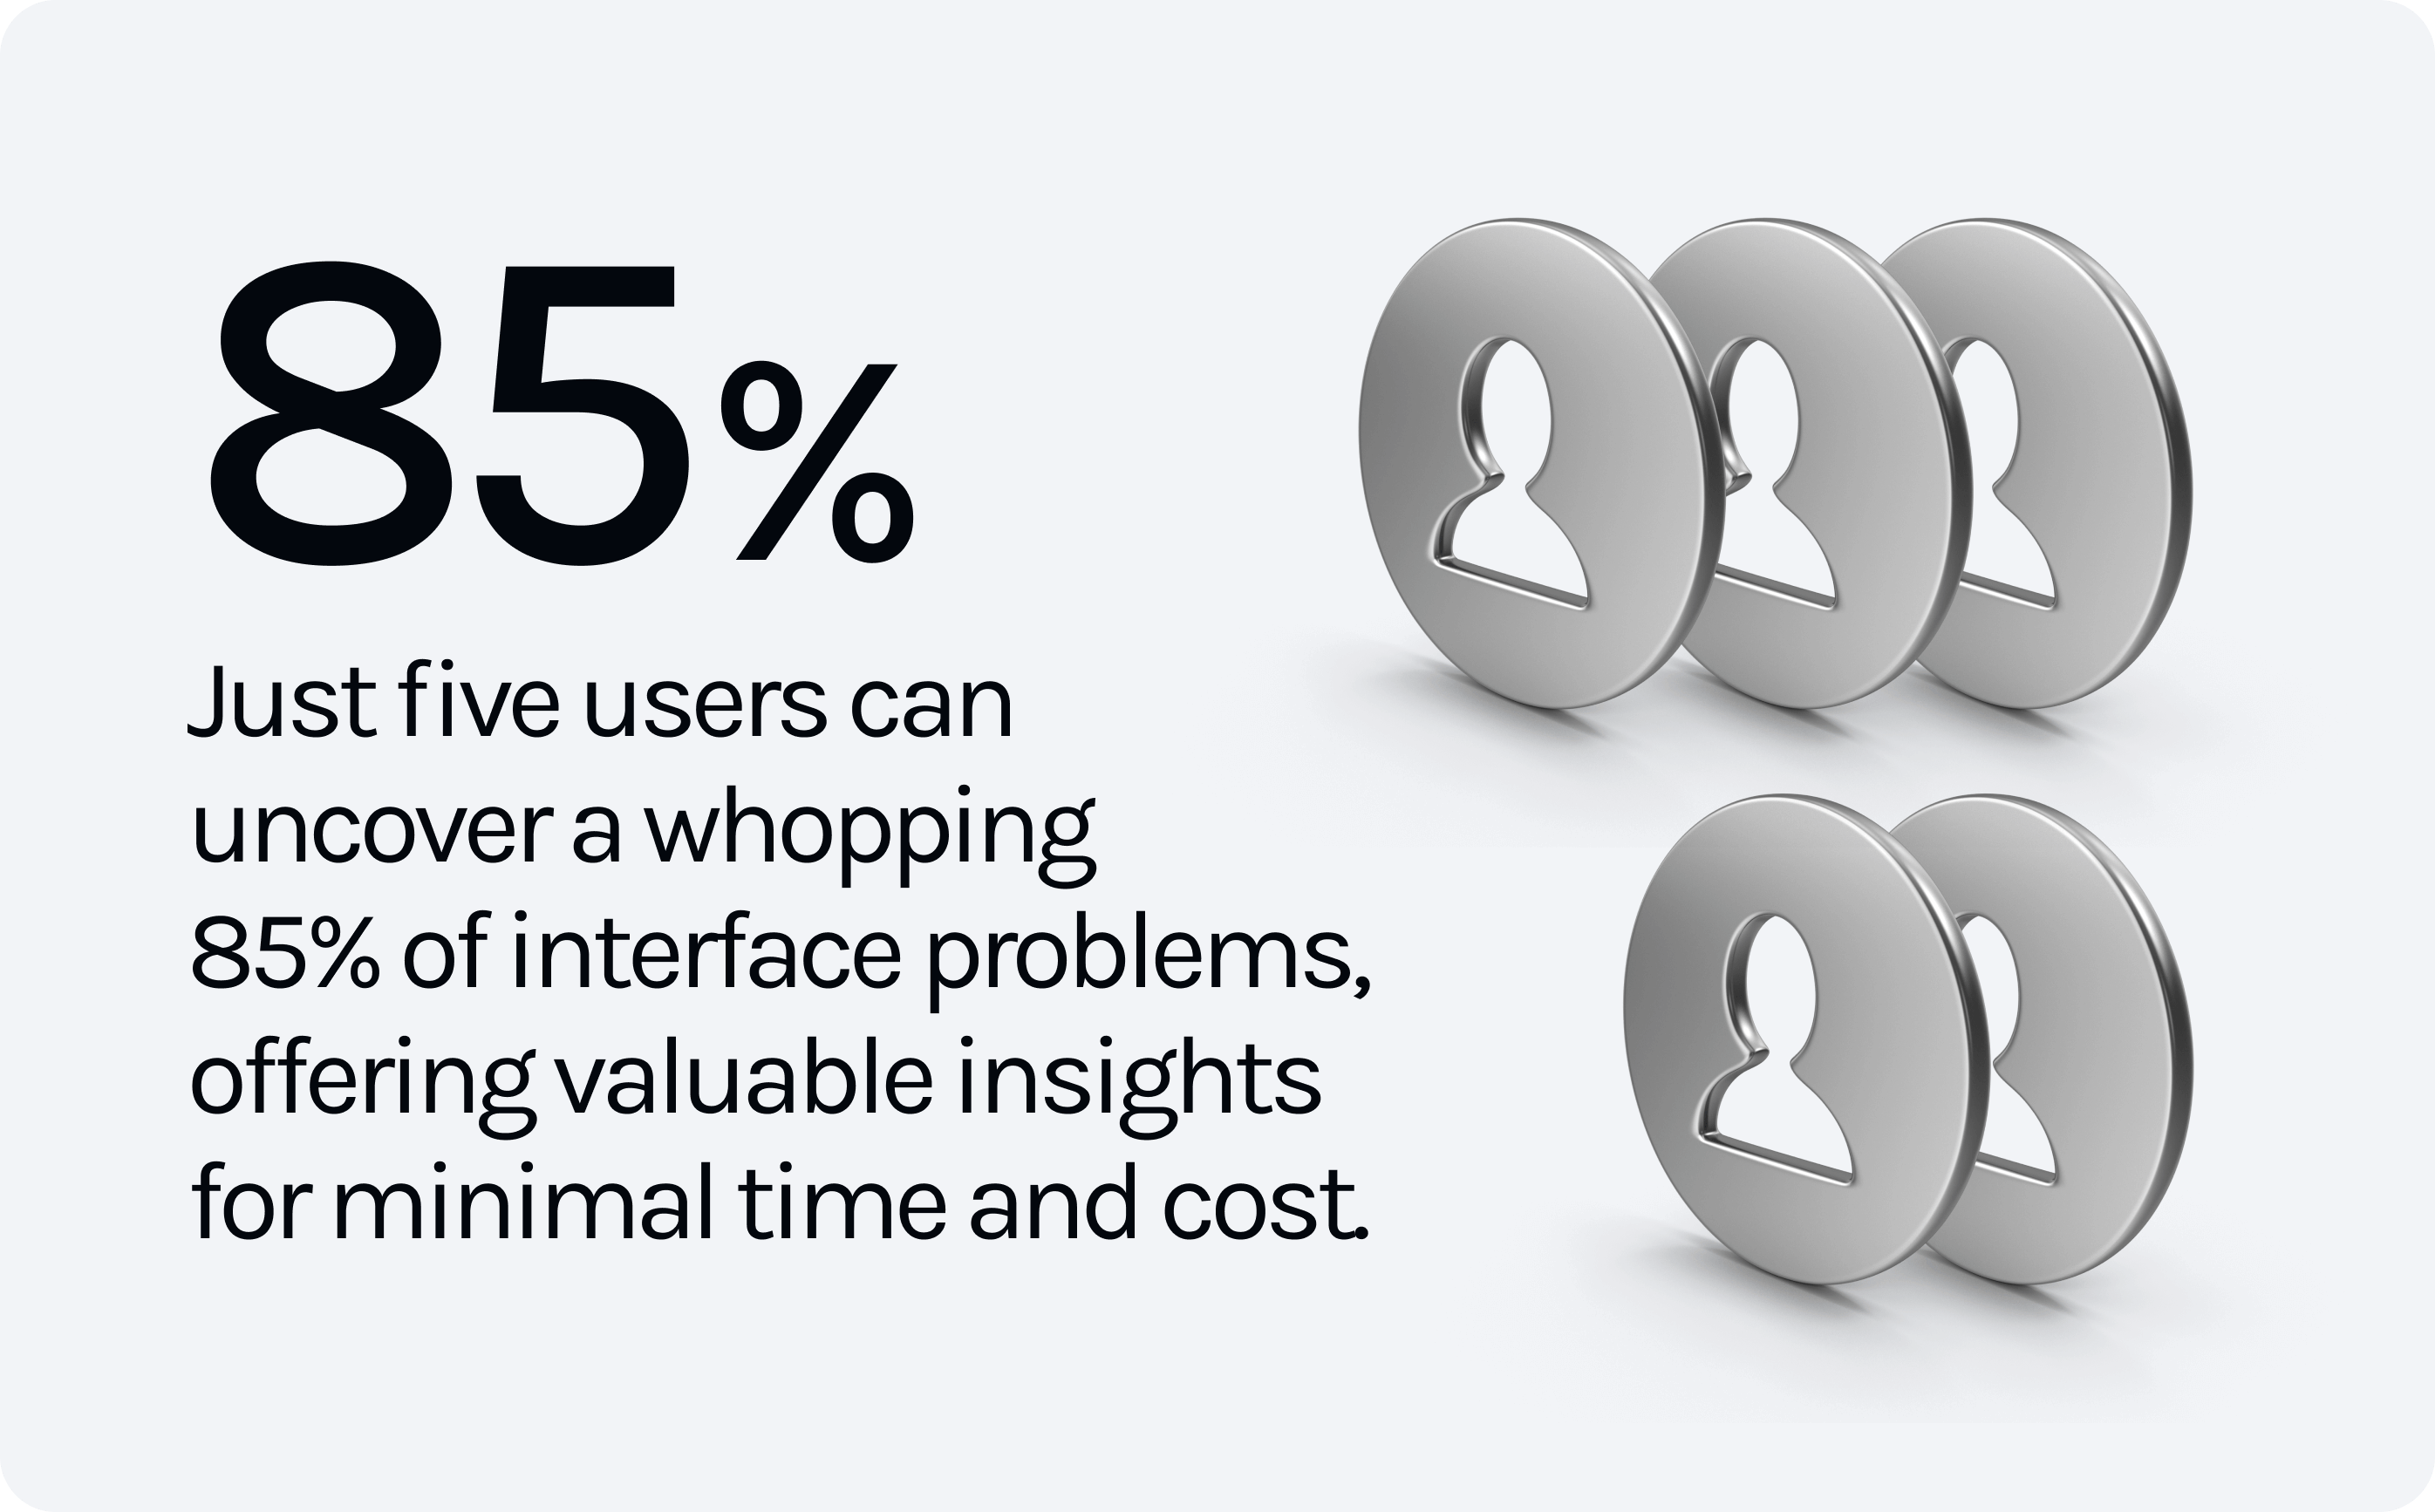 Just five users can uncover a whopping  85% of interface problems, offering valuable insights for minimal time and cost.